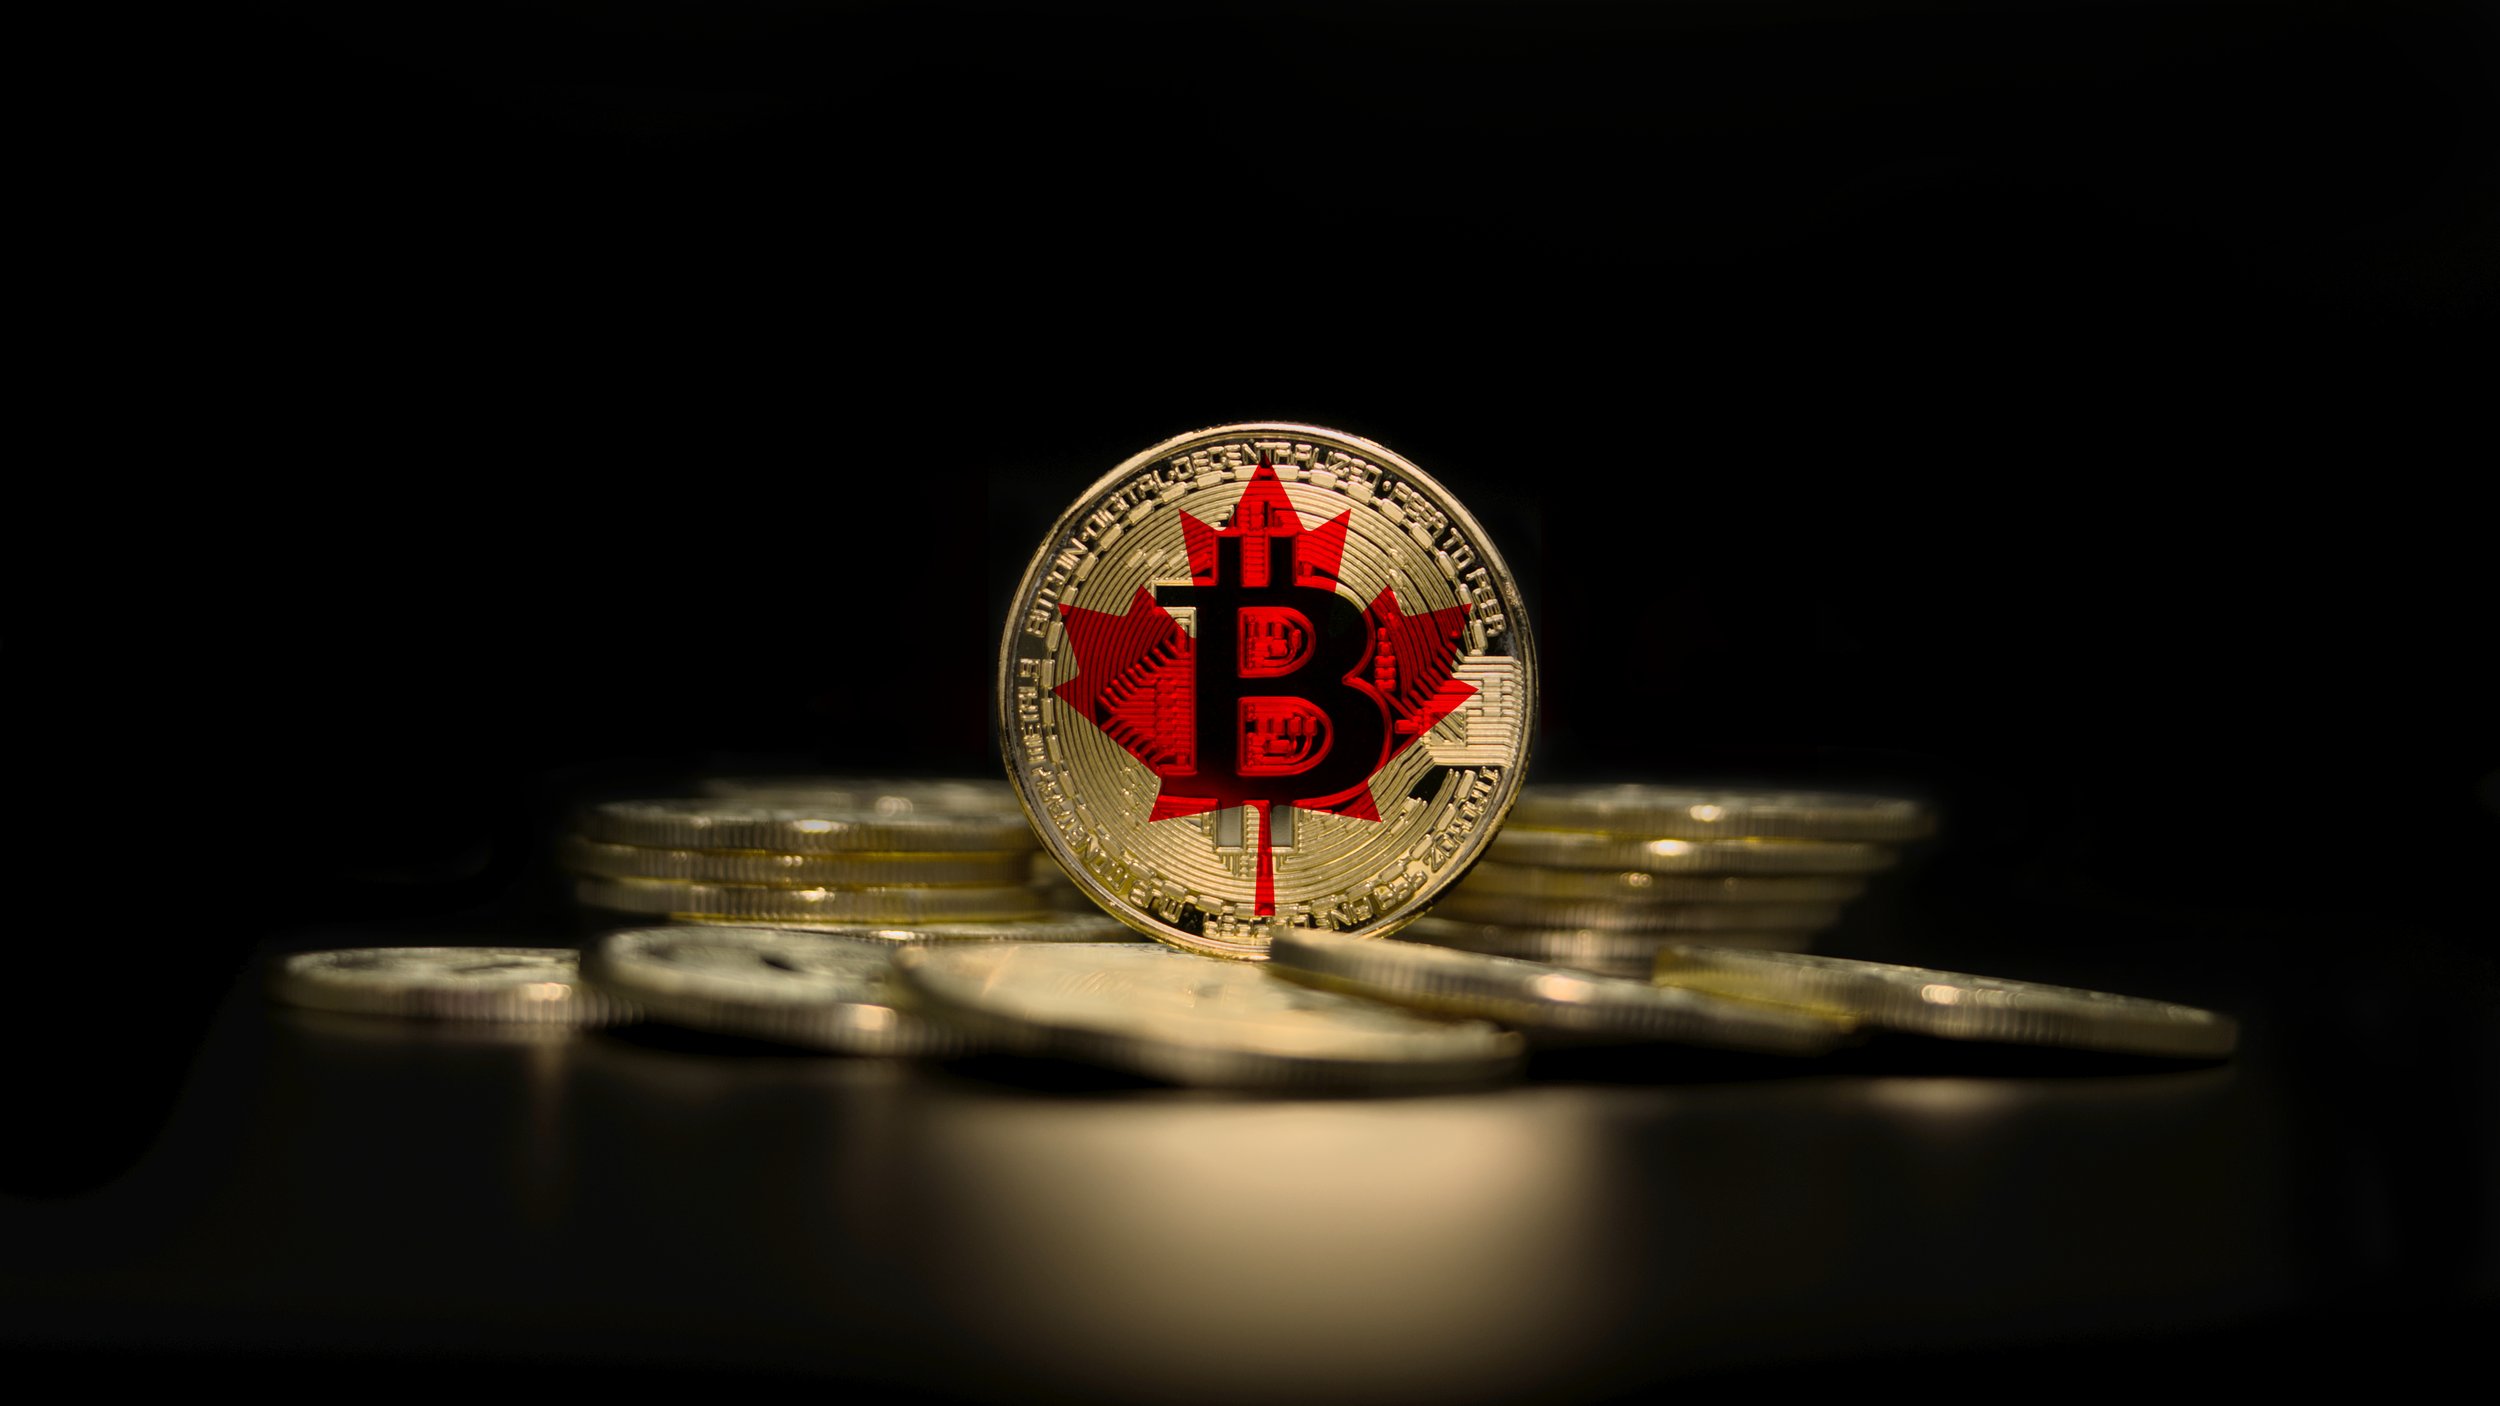 Canadian BItcoin, Bitcoin Coins stacked on Each other with the center being a Bitcoin with a canadian flag on it